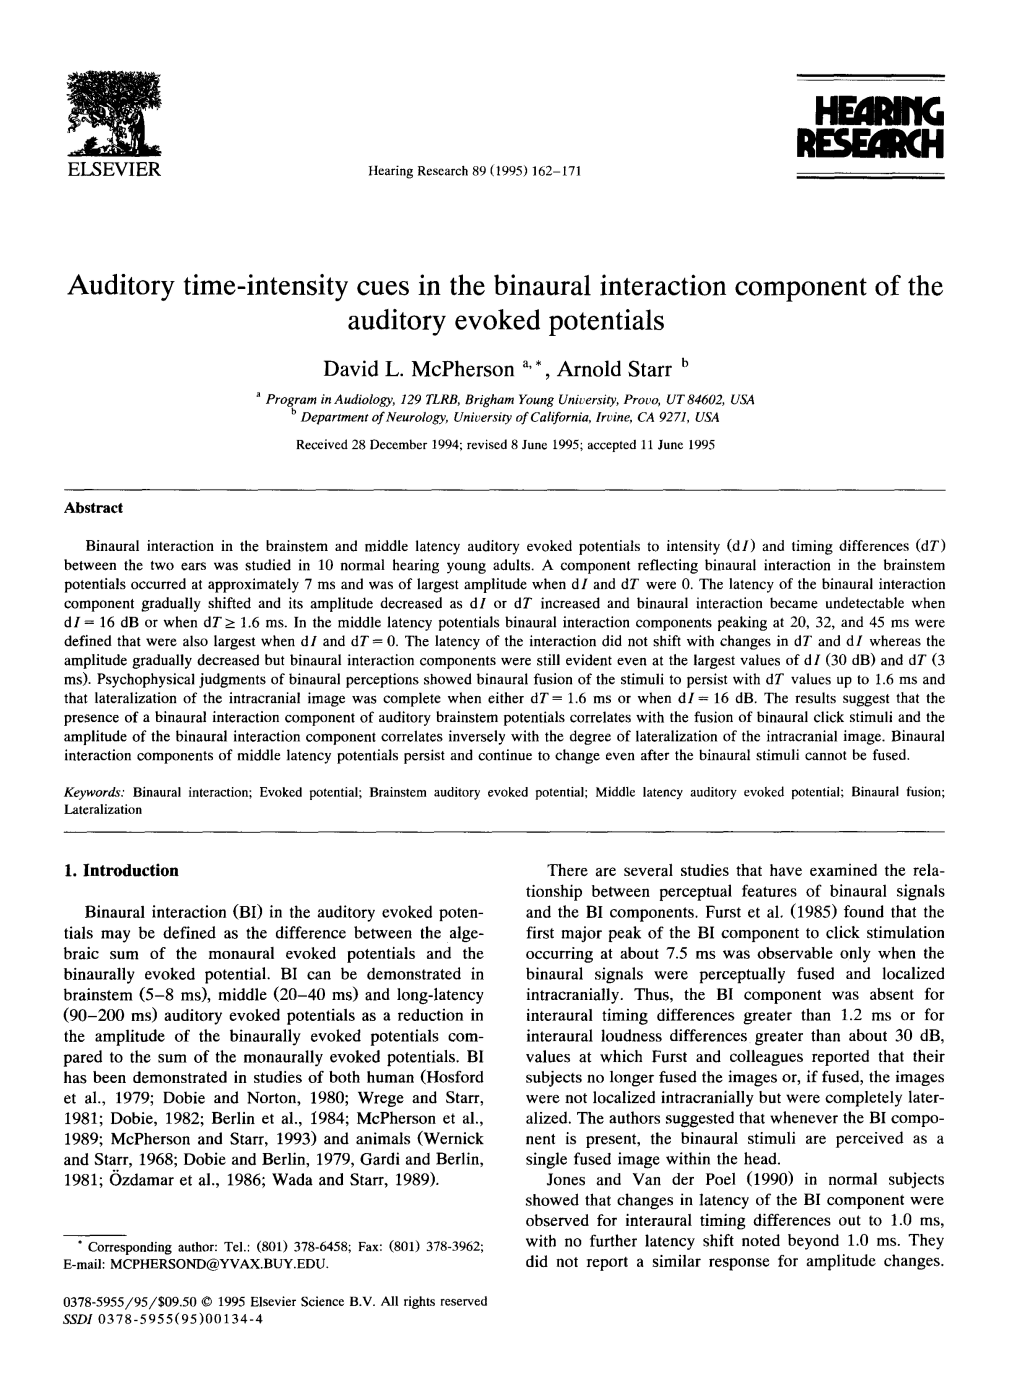 Auditory Time-Intensity Cues in the Binaural Interaction Component of the Auditory Evoked Potentials